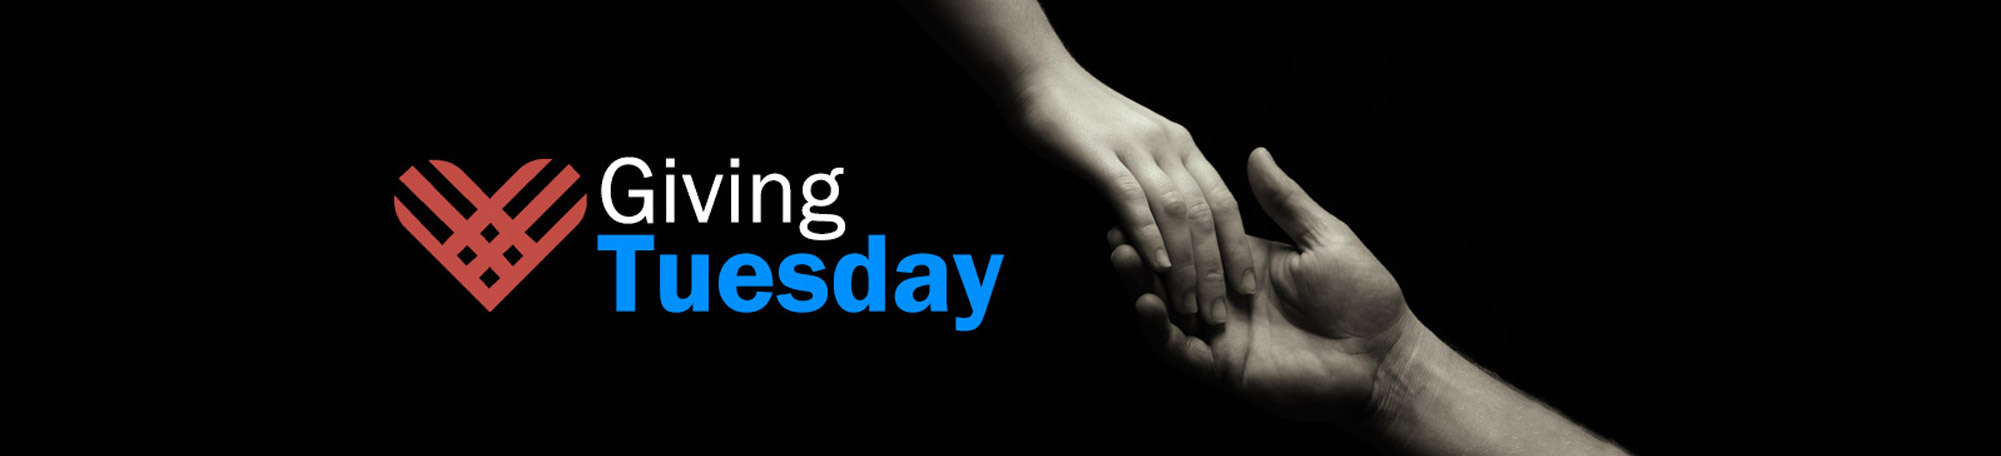 Giving Tuesday - A closeup photo of of a hand reaching out and holding anothers persons hand.